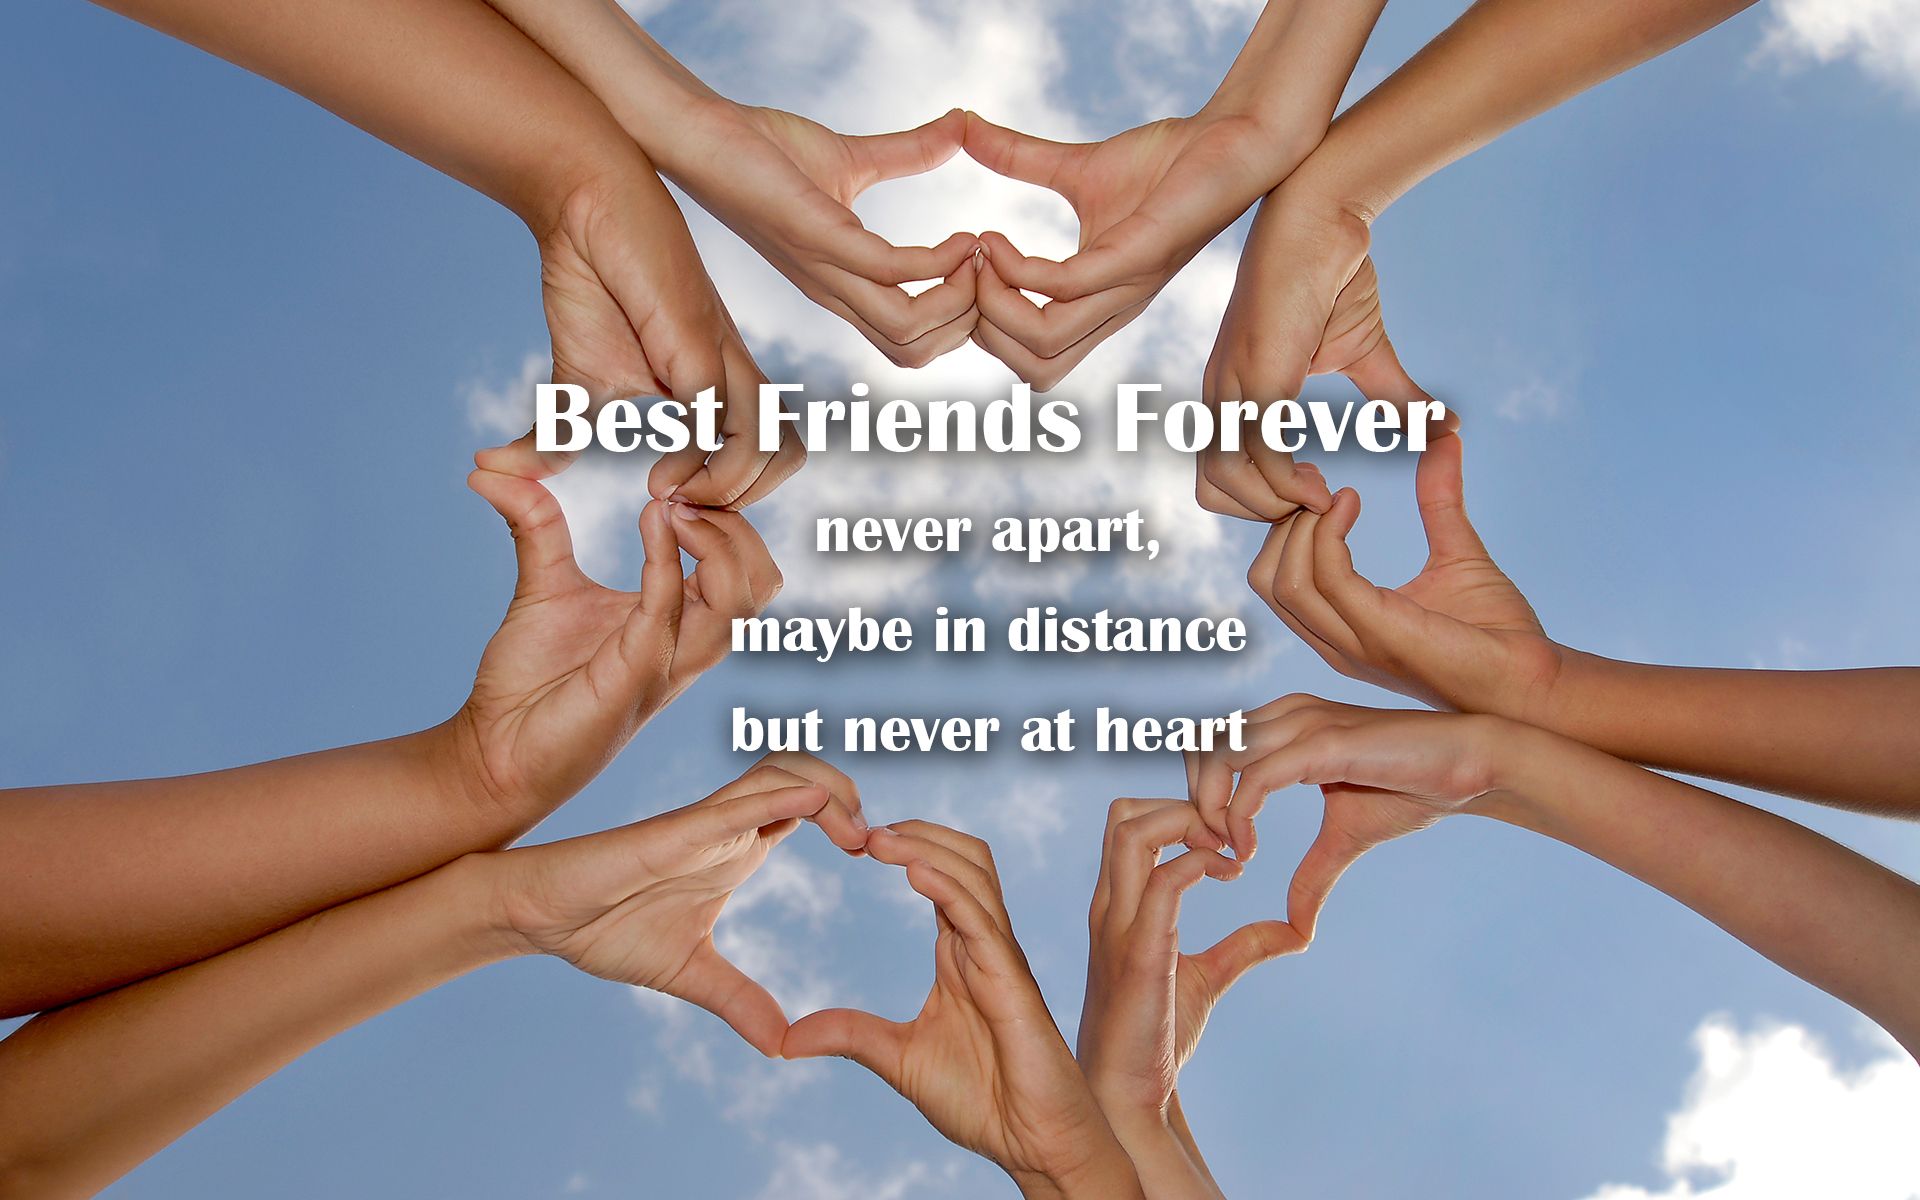 Best Friends Forever Quotes Wallpaper Forever Image For Whatsapp HD